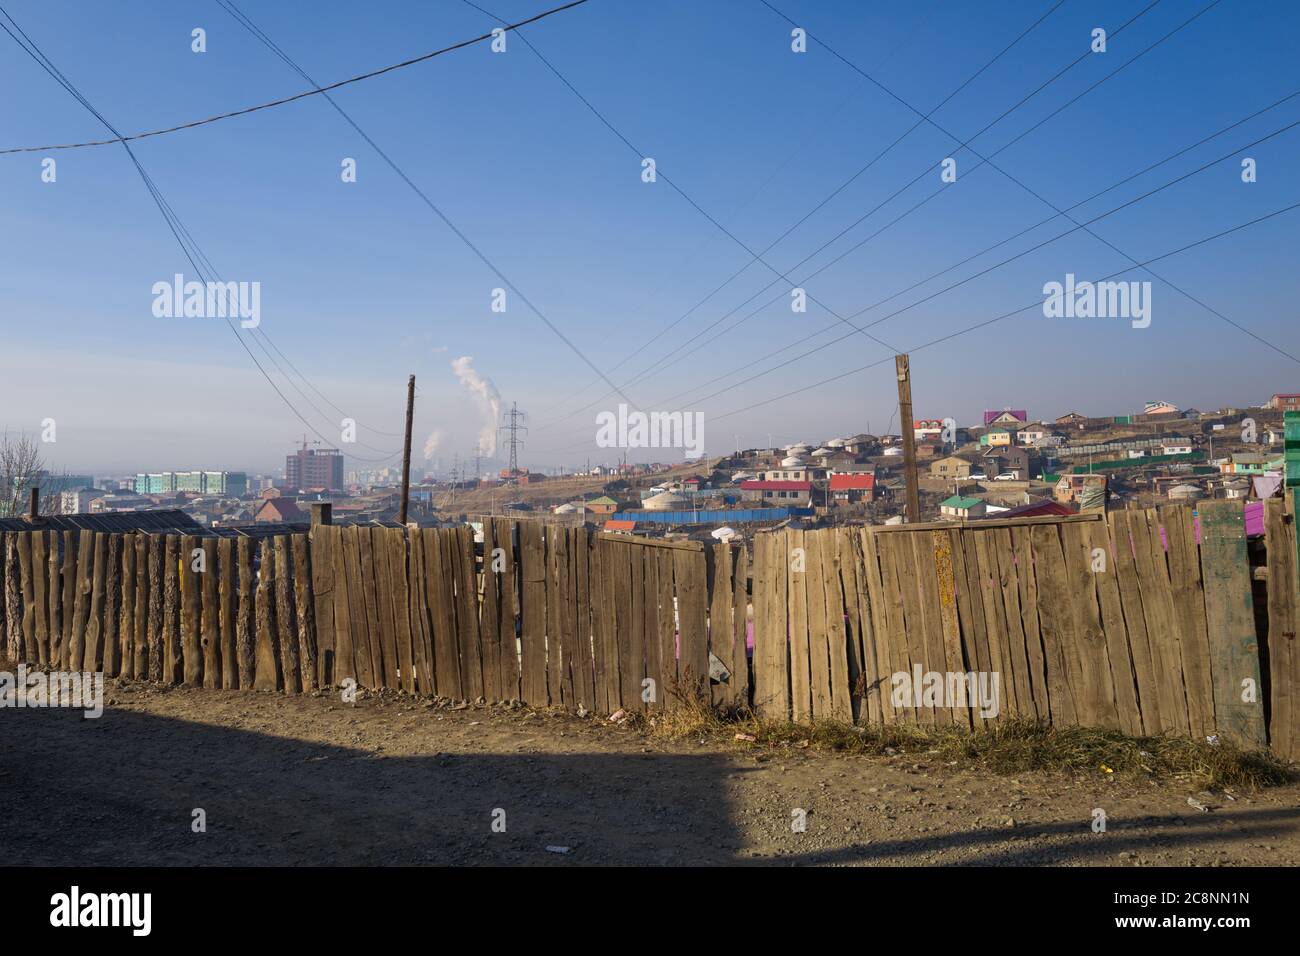 Cityscape of suburb in Ulaanbataar / Ulan Bator, Mongolia. Graphic elements created by lines of telegraph wires and rectangles of a fence. Stock Photo